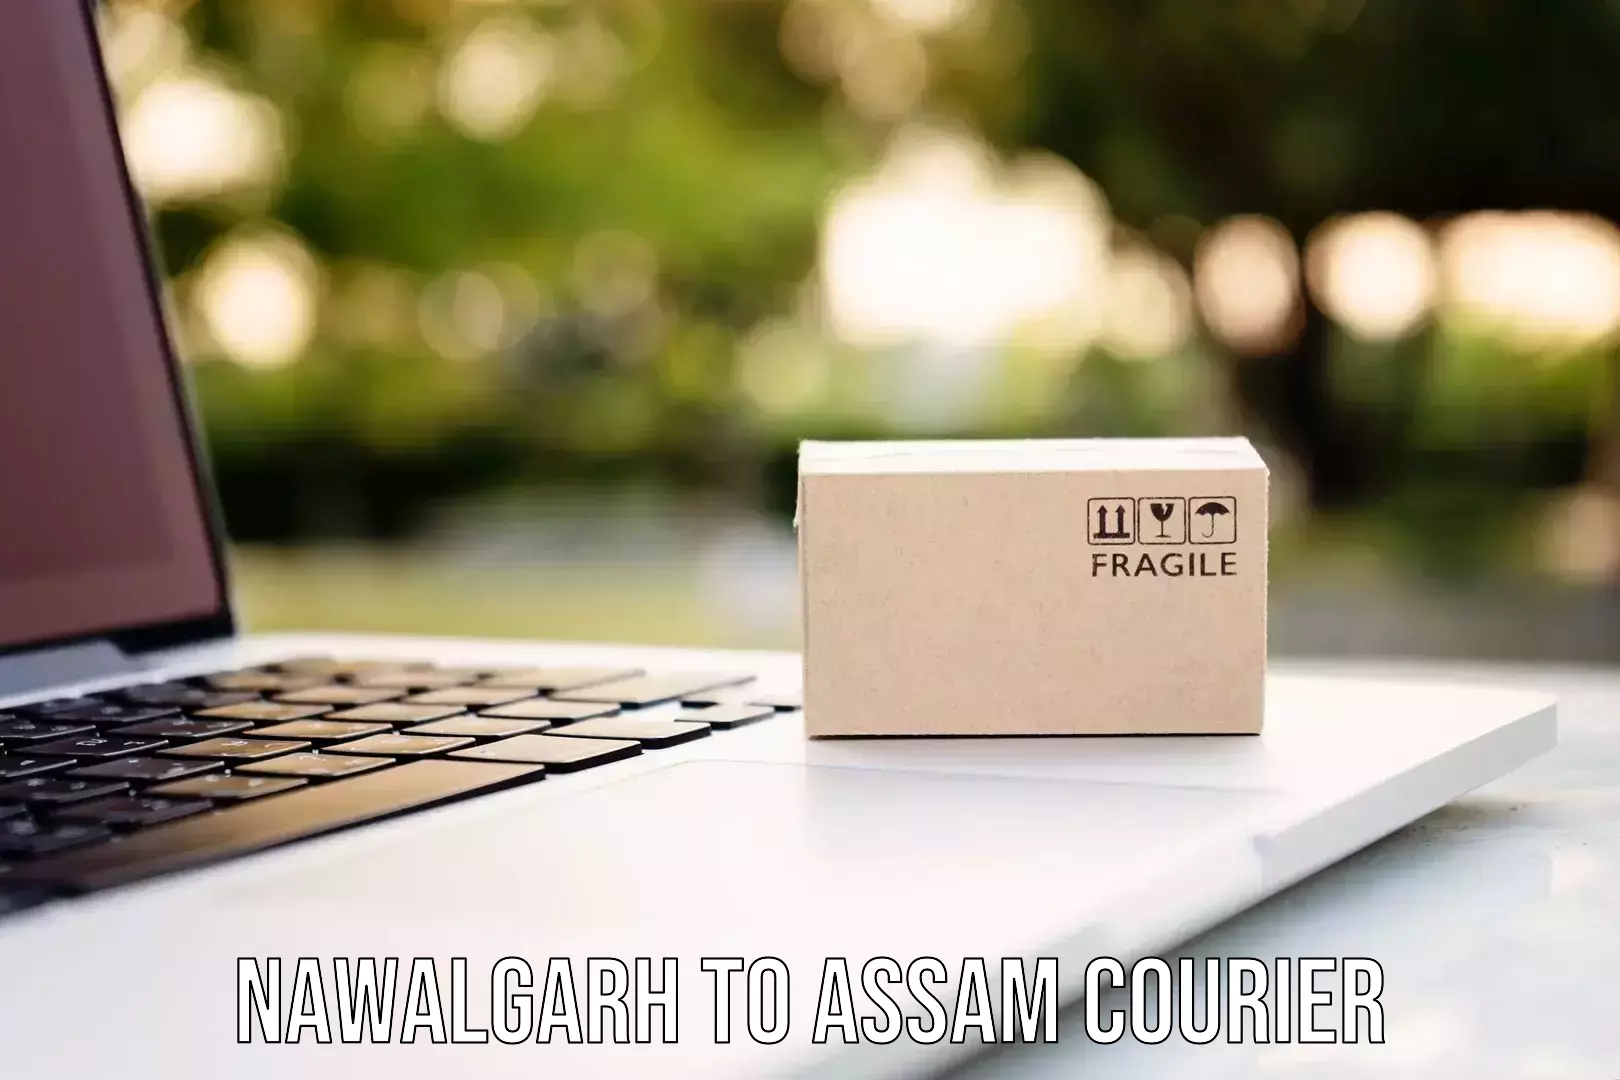 State-of-the-art courier technology Nawalgarh to IIT Guwahati